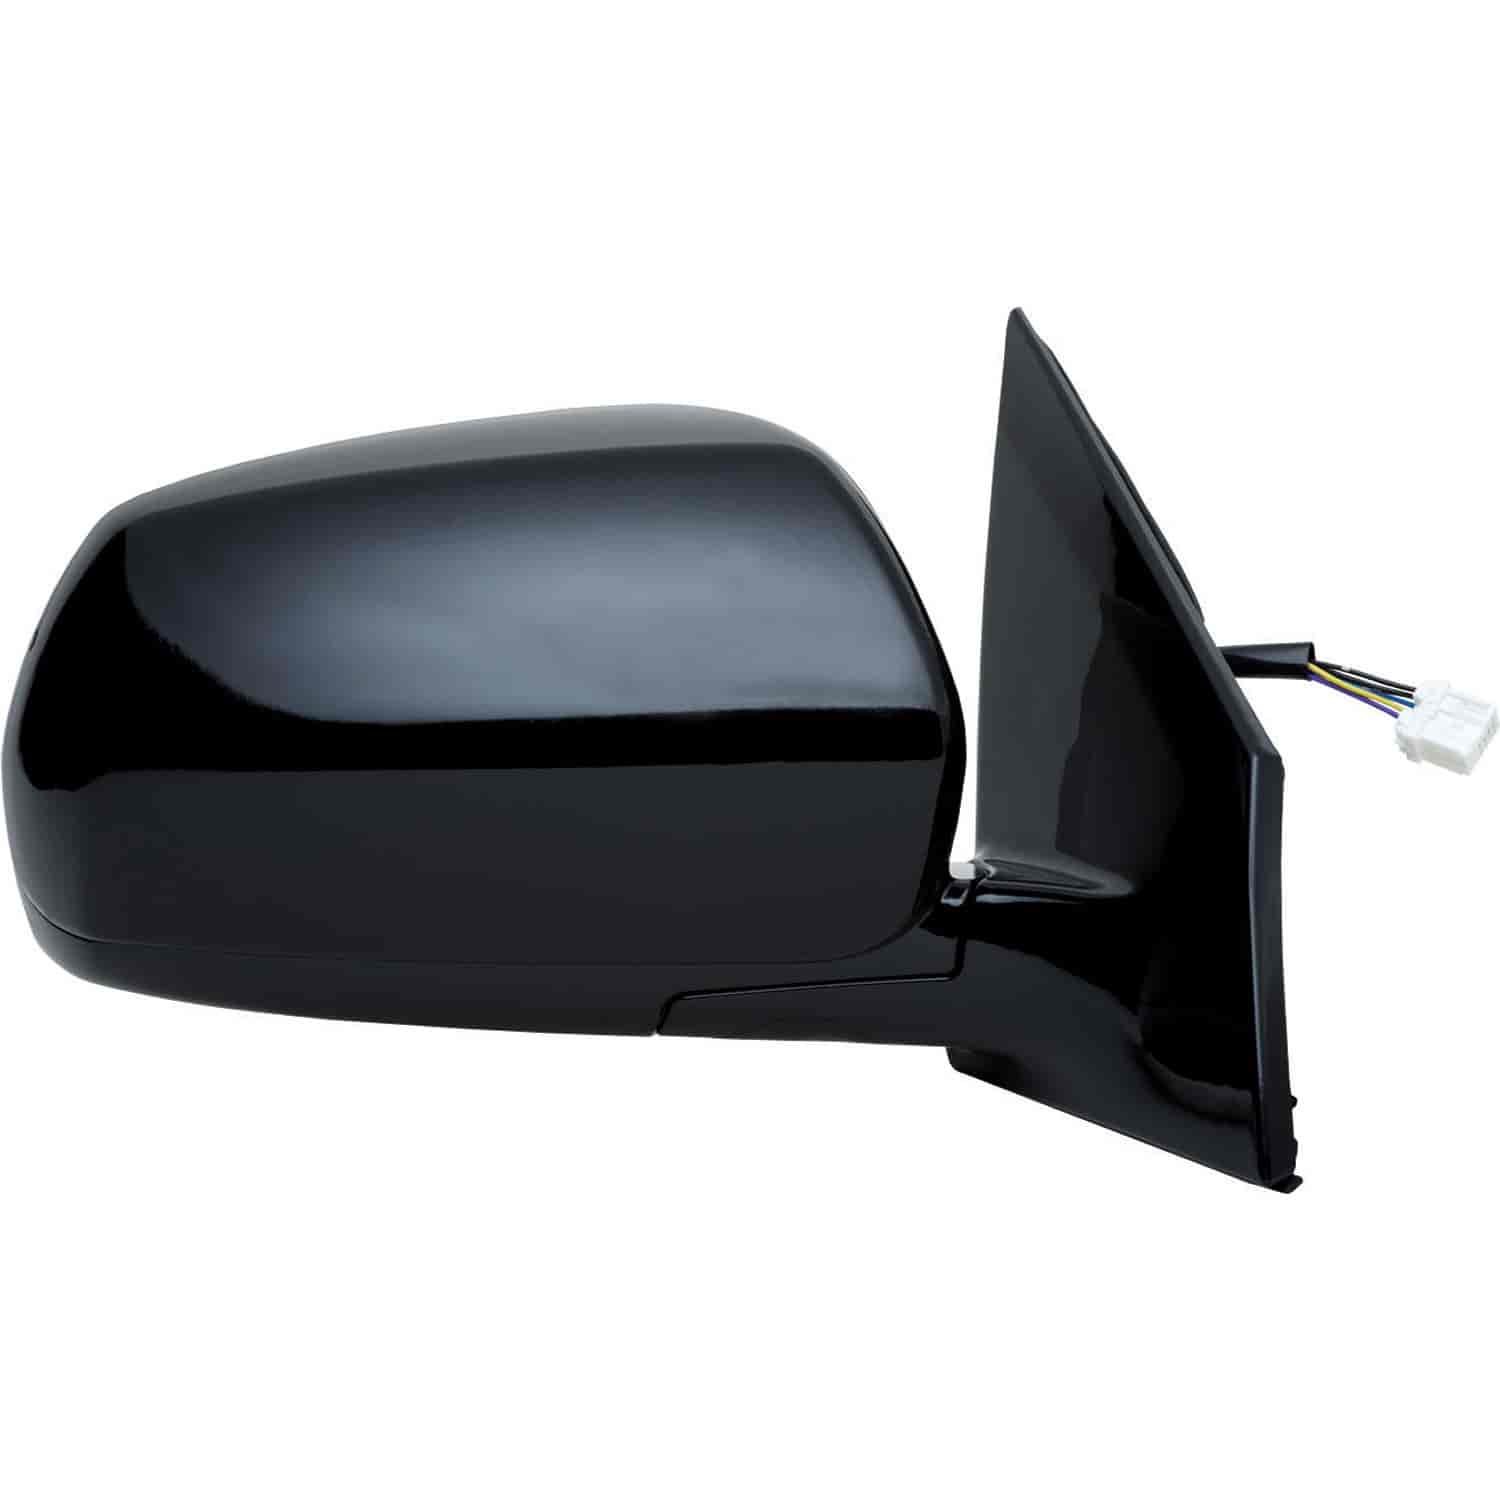 OEM Style Replacement mirror for 05-07 Nissan Murano w/memory passenger side mirror tested to fit an